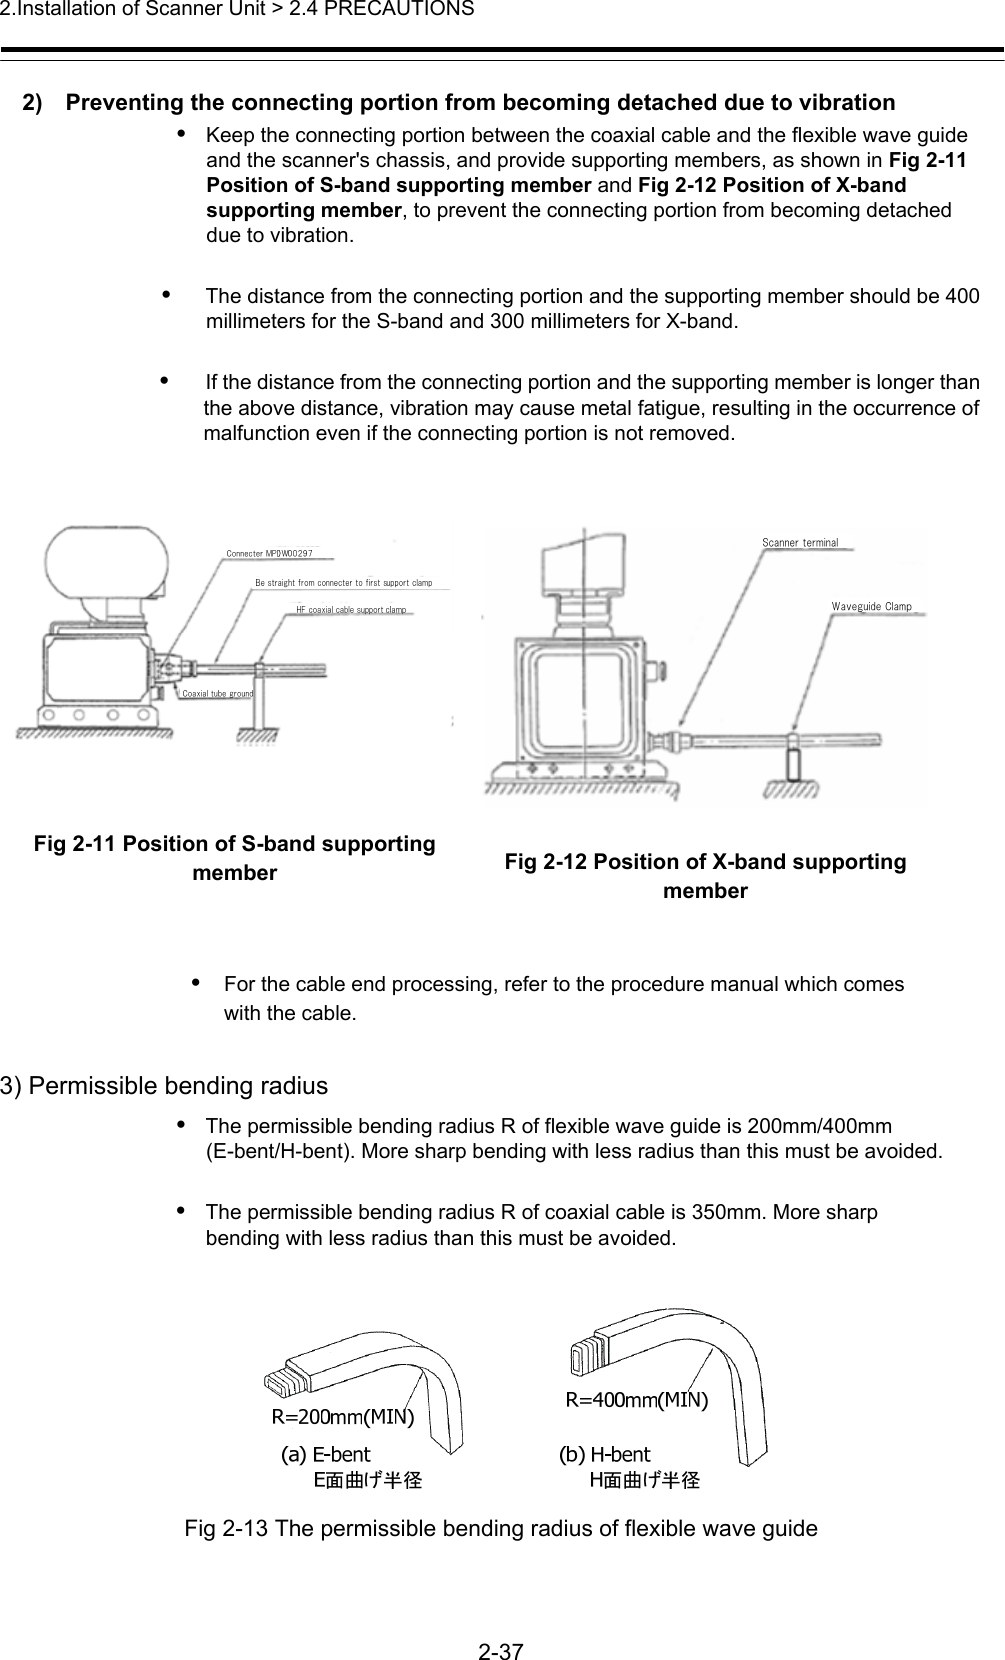 2.Installation of Scanner Unit &gt; 2.4 PRECAUTIONS   2-37  2)    Preventing the connecting portion from becoming detached due to vibration •   Keep the connecting portion between the coaxial cable and the flexible wave guide and the scanner&apos;s chassis, and provide supporting members, as shown in Fig 2-11 Position of S-band supporting member and Fig 2-12 Position of X-band supporting member, to prevent the connecting portion from becoming detached due to vibration.      •   The distance from the connecting portion and the supporting member should be 400 millimeters for the S-band and 300 millimeters for X-band.    •   If the distance from the connecting portion and the supporting member is longer than the above distance, vibration may cause metal fatigue, resulting in the occurrence of malfunction even if the connecting portion is not removed.            Fig 2-11 Position of S-band supporting member  Fig 2-12 Position of X-band supporting member  •   For the cable end processing, refer to the procedure manual which comes       with the cable.  3) Permissible bending radius •   The permissible bending radius R of flexible wave guide is 200mm/400mm     (E-bent/H-bent). More sharp bending with less radius than this must be avoided.  •   The permissible bending radius R of coaxial cable is 350mm. More sharp       bending with less radius than this must be avoided.   Fig 2-13 The permissible bending radius of flexible wave guide 